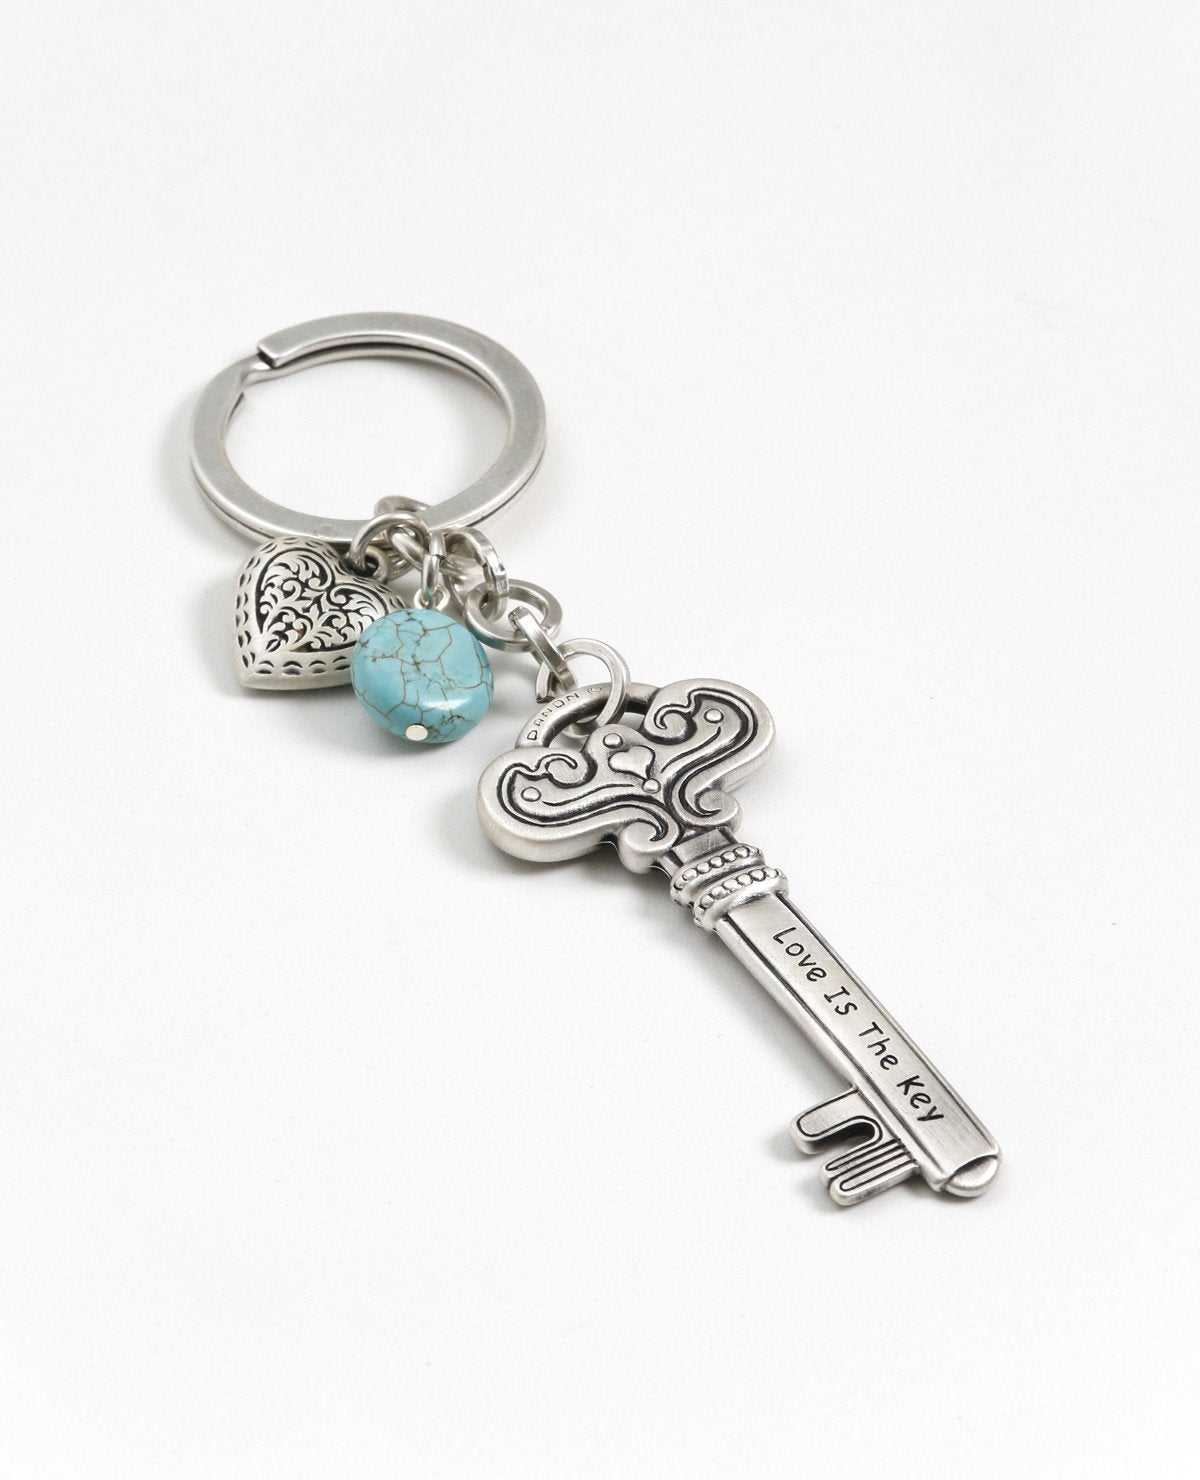 Love is the key to everything! Always! A keychain that is all love. Designed as a large and impressive key decorated with embossed artistic elements and tiny hearts. On one side the sentence "Love Is The Key" is engraved, and on the other side the sentence "The Key To My Heart". Connected to the top of the key is a chain with a sweet heart and a beautiful turquoise stone hanging upon it. The keychain is coated in sterling silver and is strong and reliable. An exciting gift for those still searching for the 